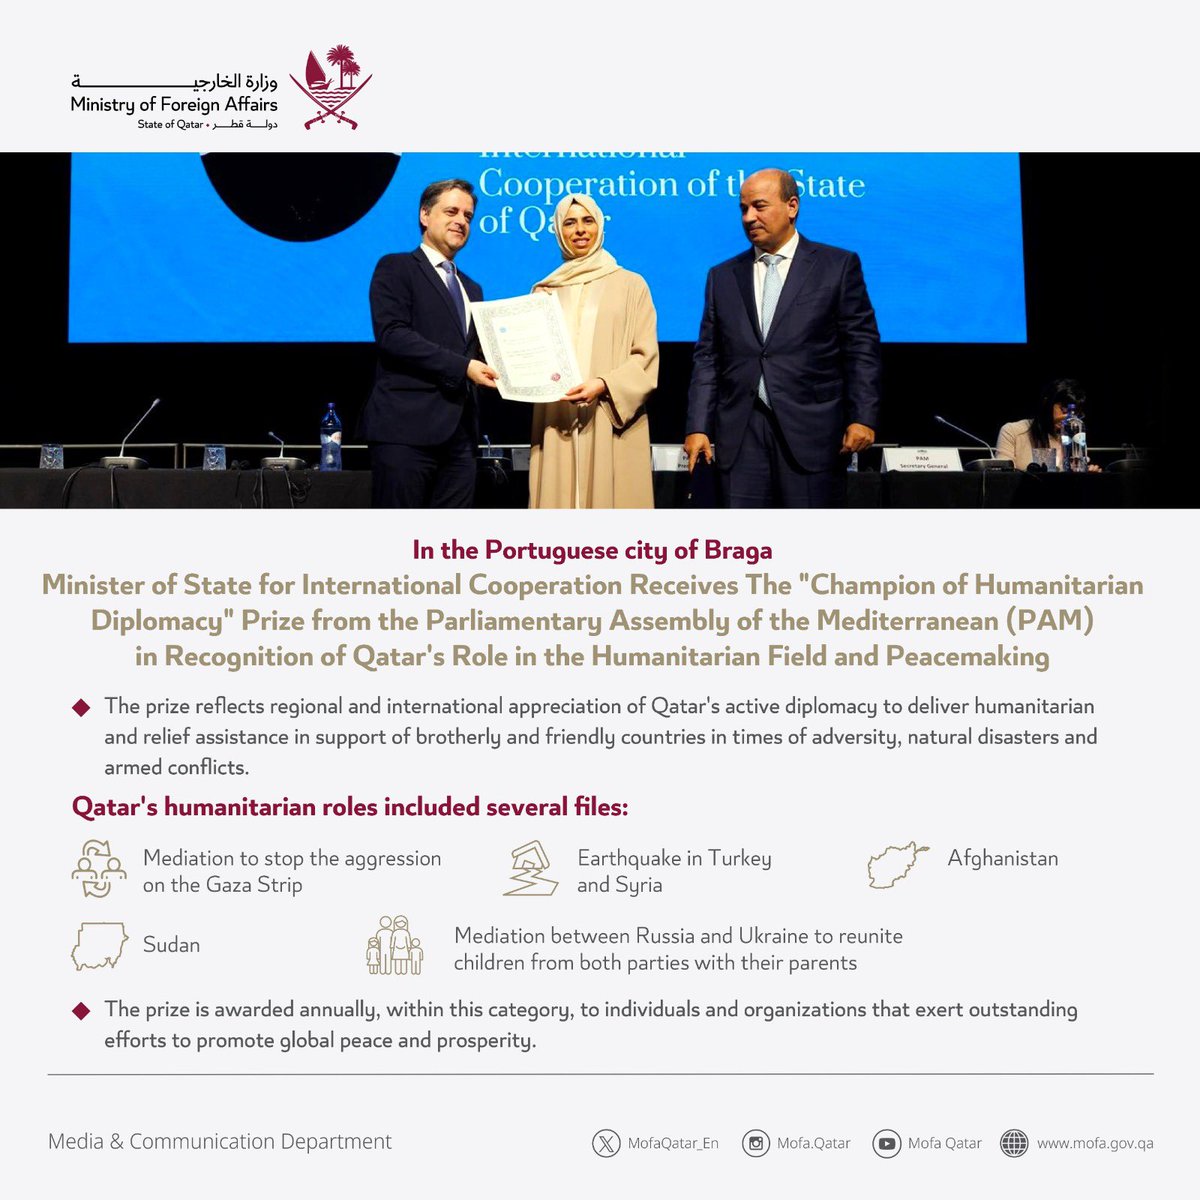 In the Portuguese city of Braga Minister of State for International Cooperation @Lolwah_Alkhater Receives The 'Champion of Humanitarian Diplomacy' Prize from the Parliamentary Assembly of the Mediterranean (PAM) in Recognition of Qatar's Role in the Humanitarian Field and